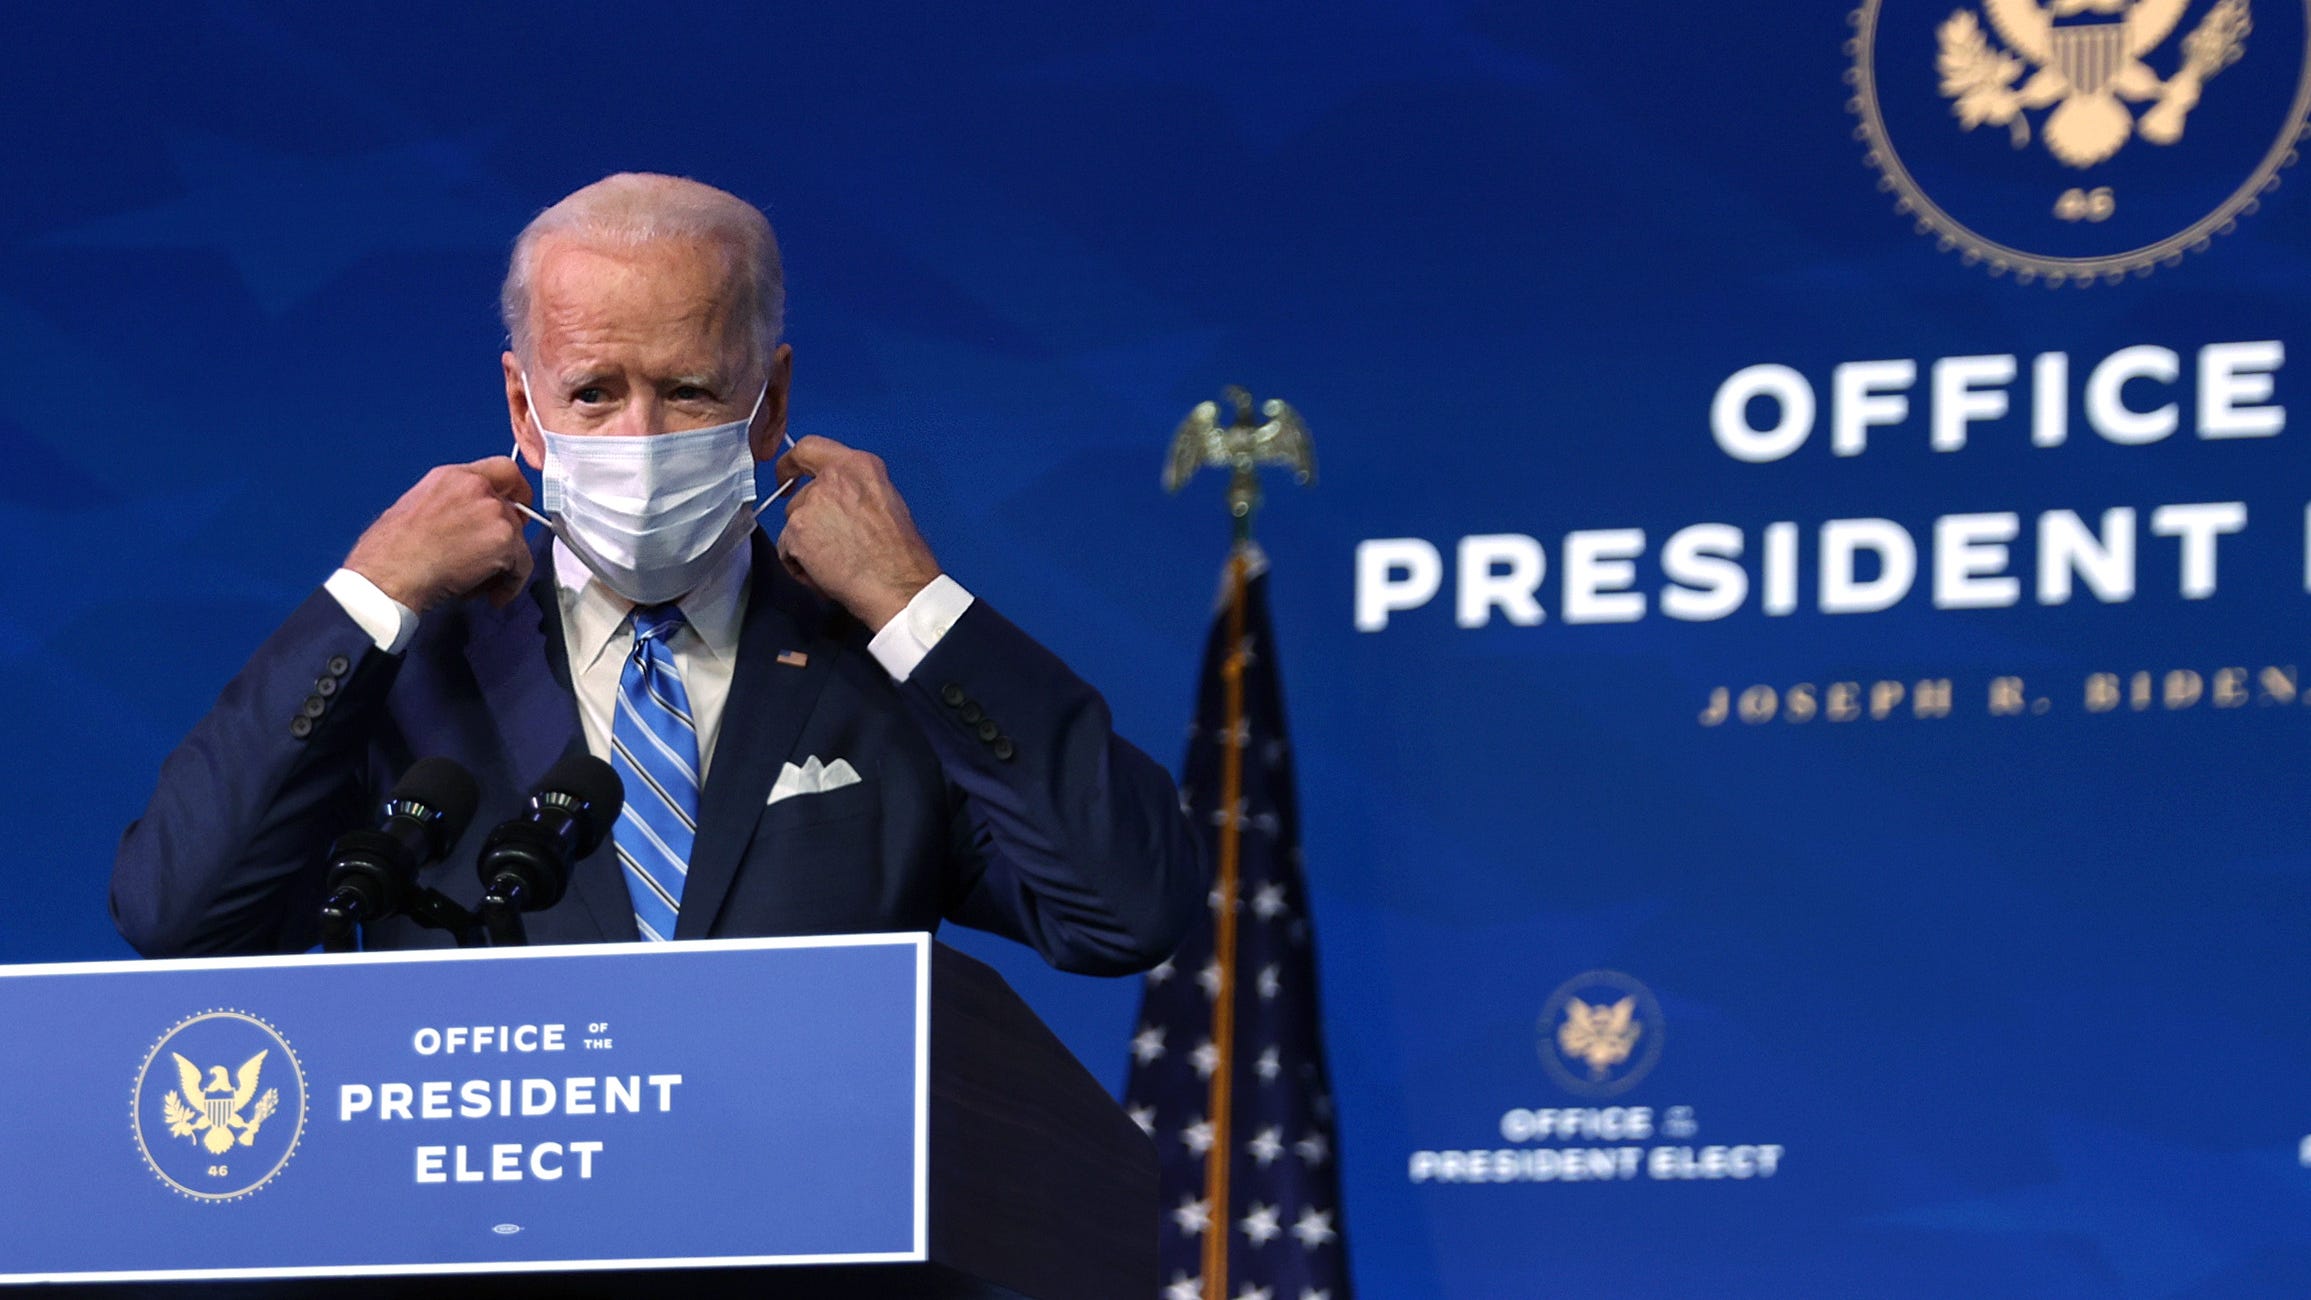 Biden's COVID-19 vaccine plan, Mega Millions jackpot, fast-food workers to strike: 5 things to know Friday